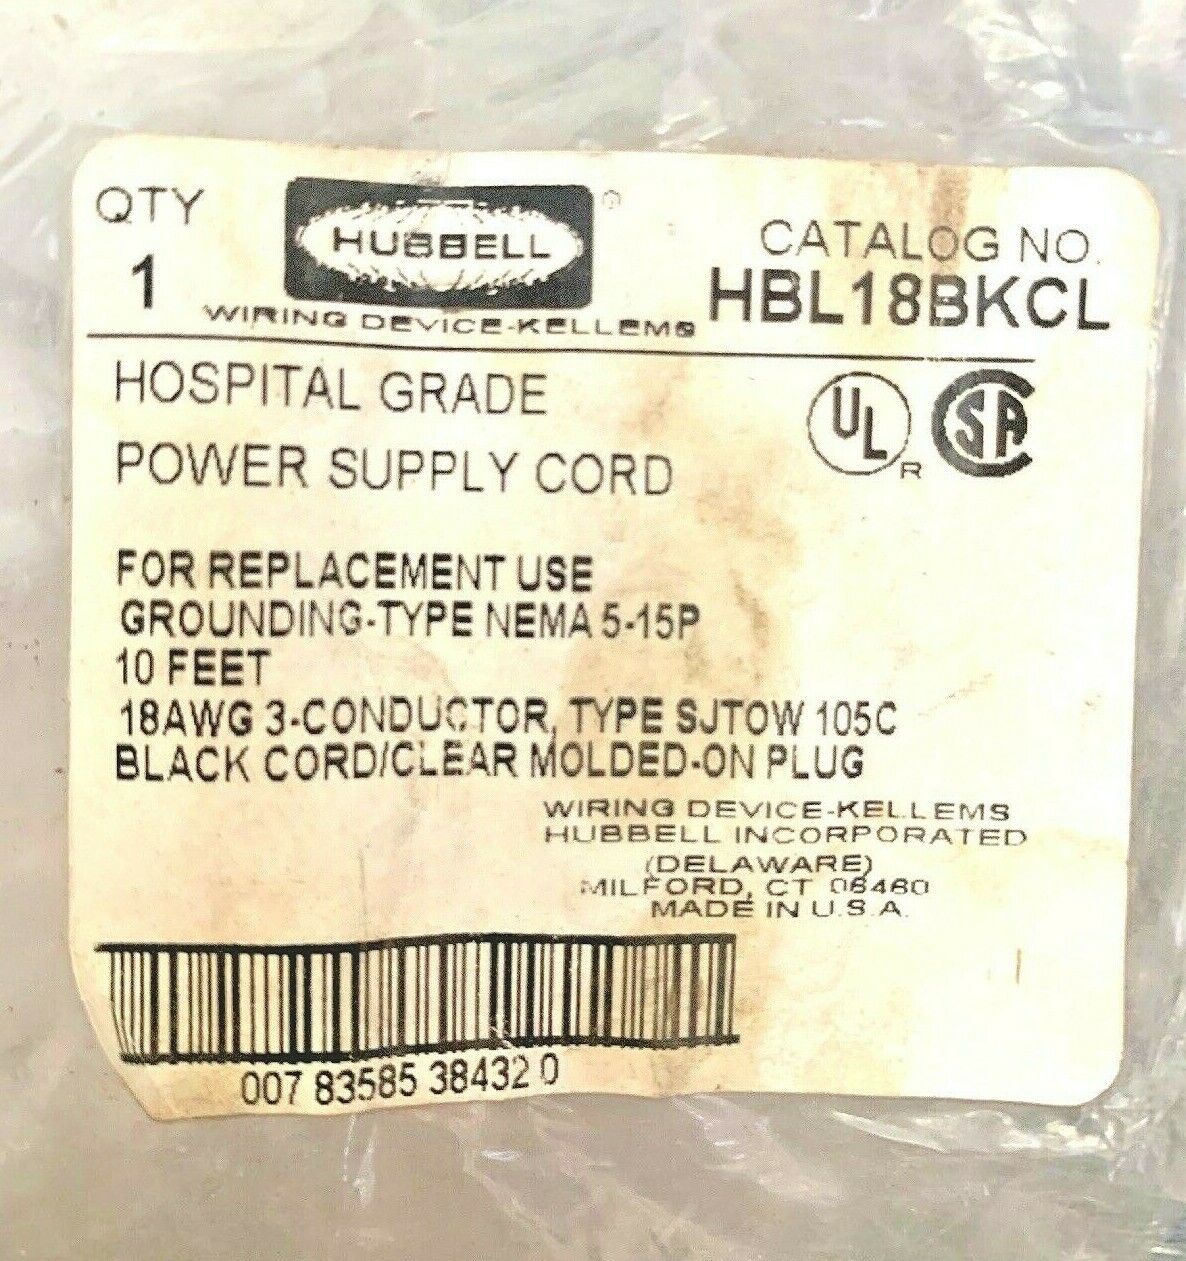 Hubbell Power Supply Cord Hospital Grade HBL18BKCL Qty 3